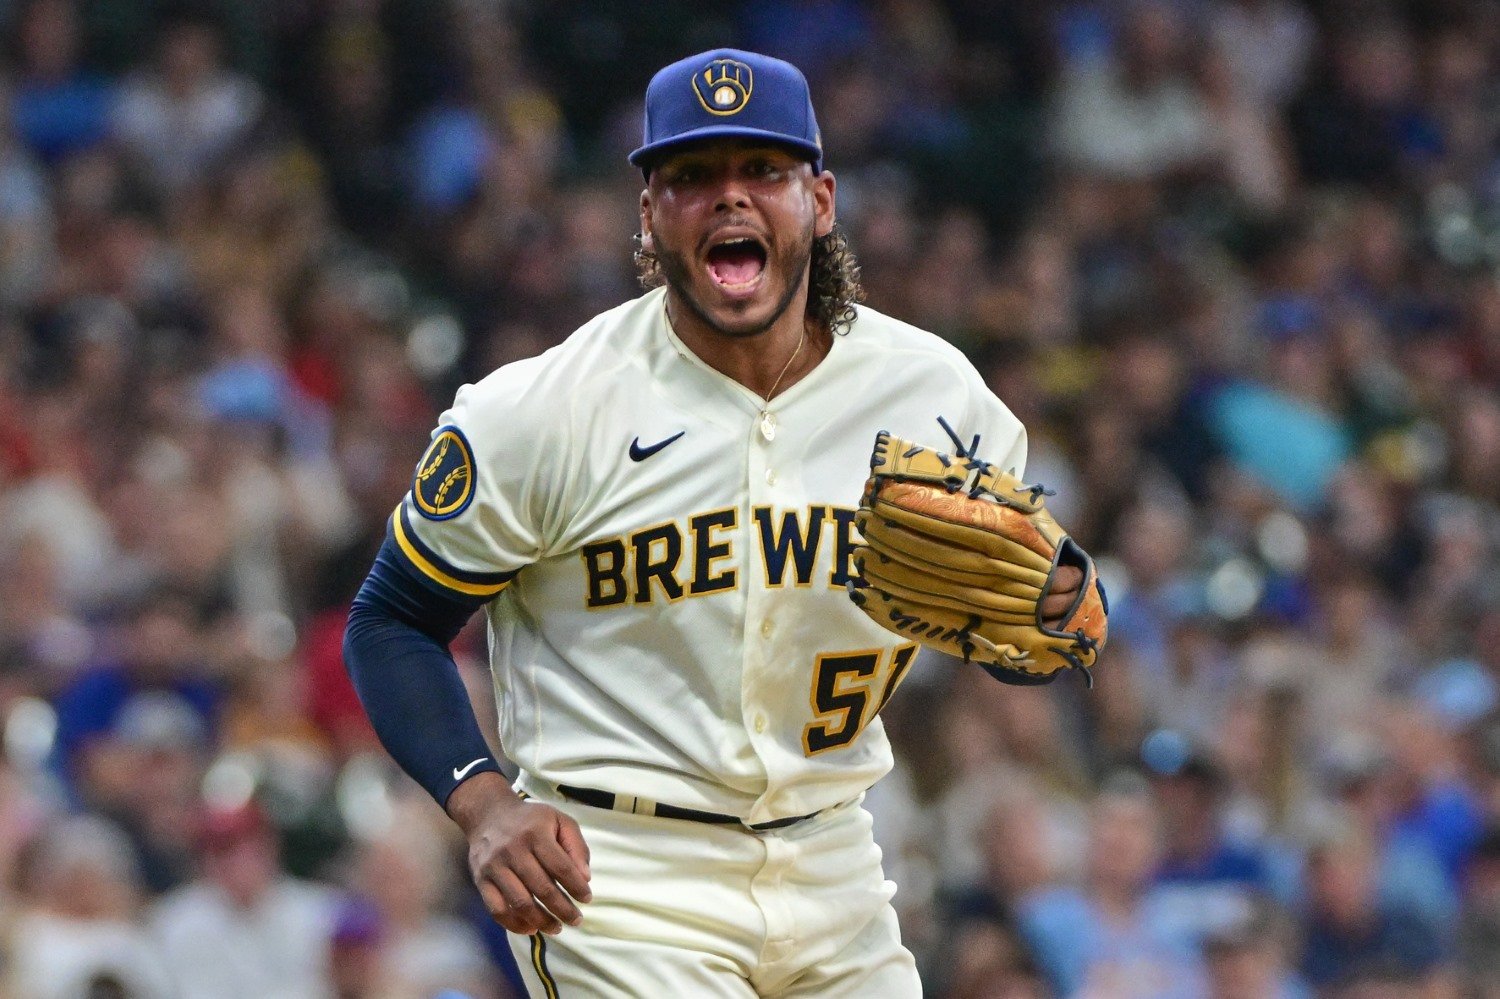 How Big is the Return on a Potential Freddy Peralta Trade? - Brewers -  Brewer Fanatic